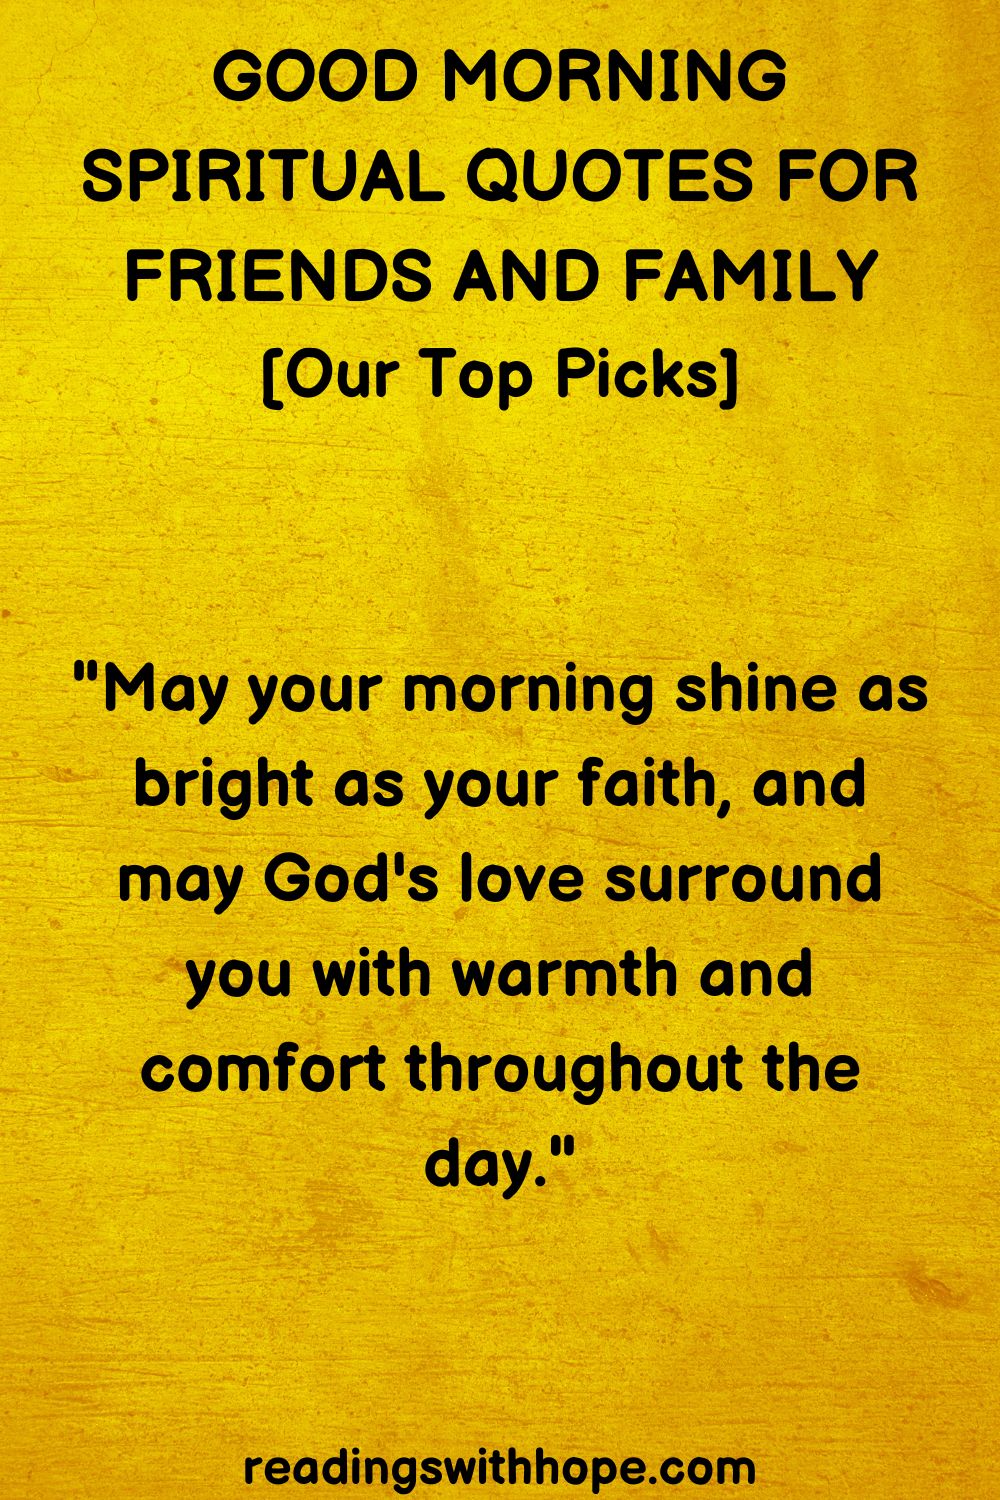 Good Morning Spiritual Quotes For Friends and Family